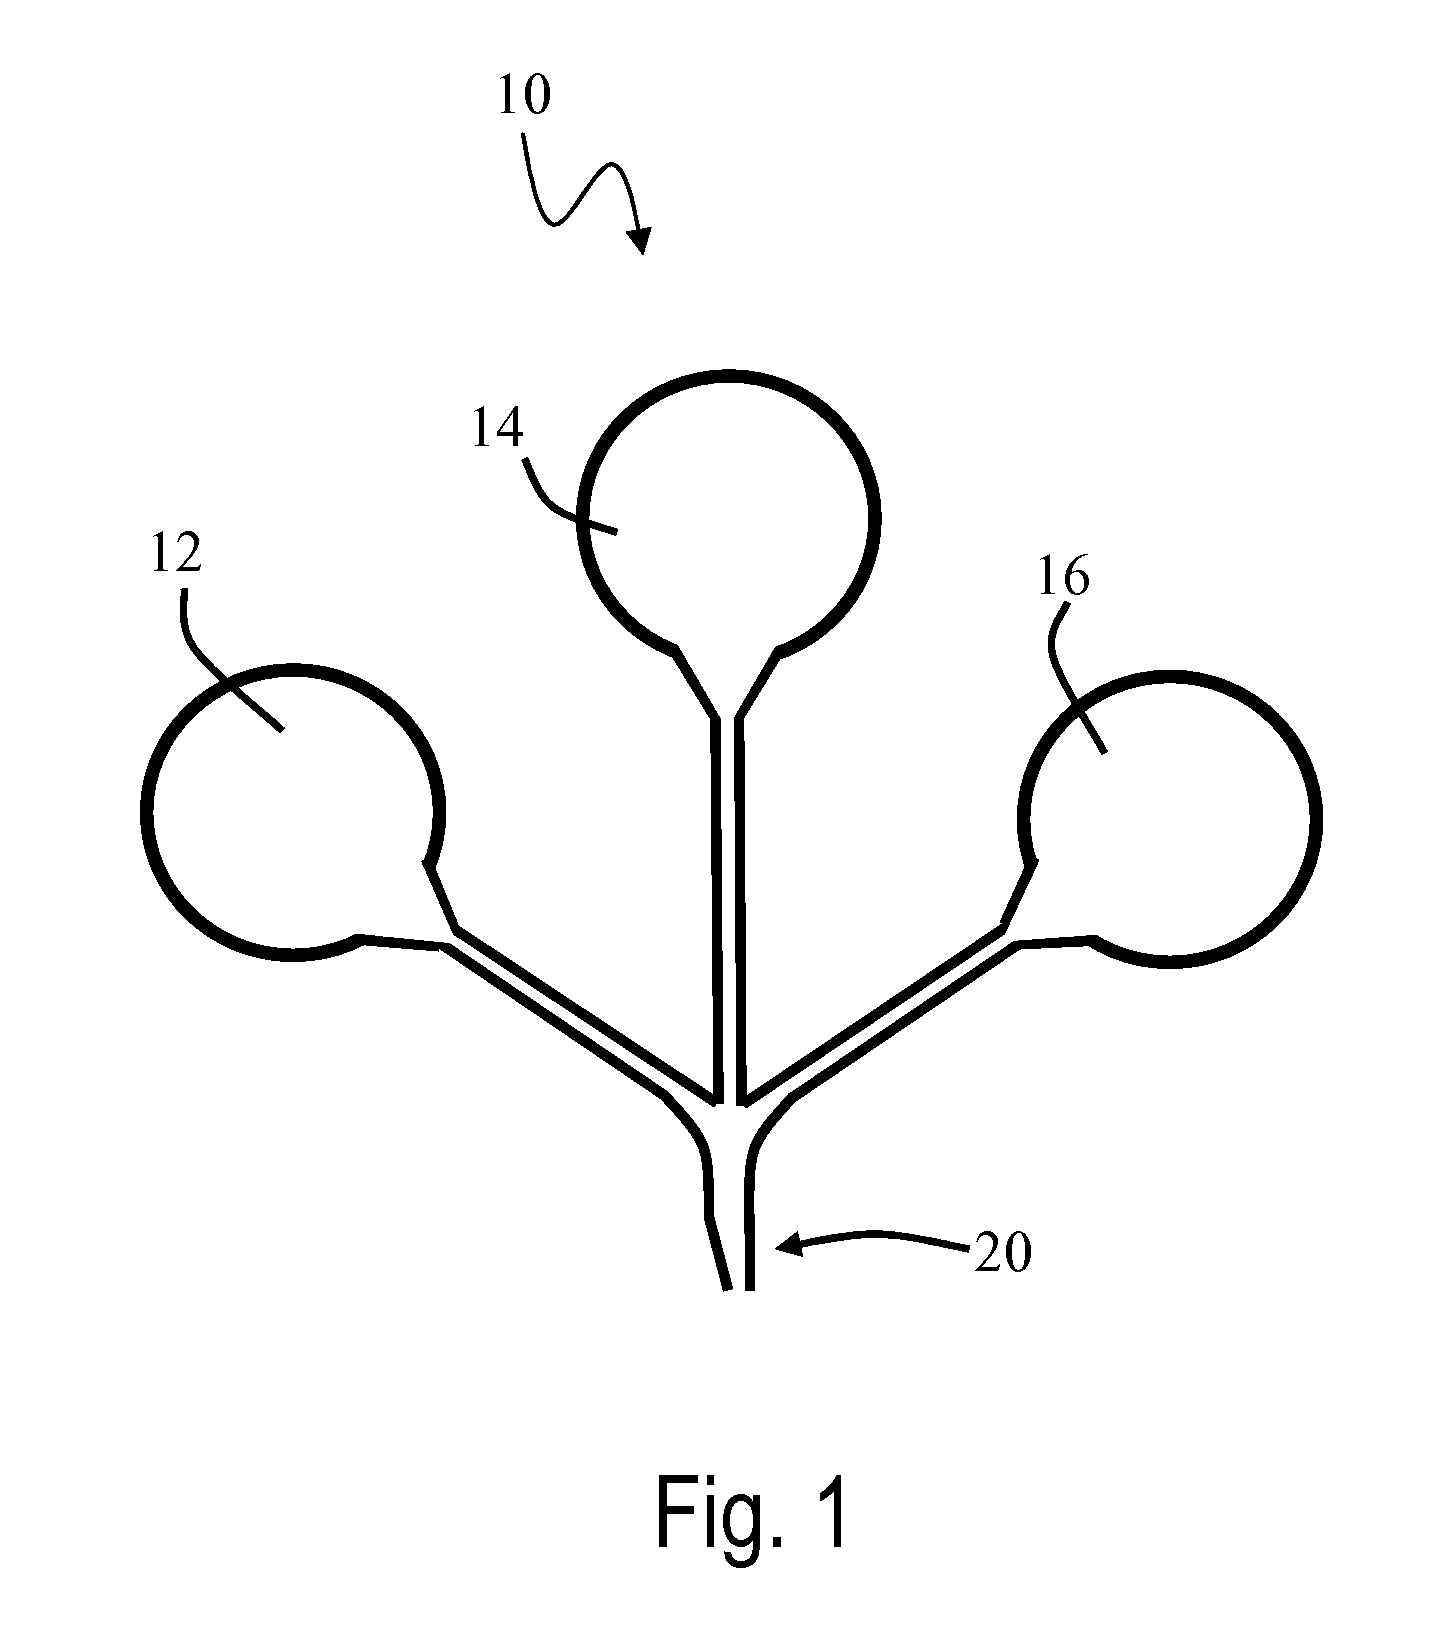 Multiple layer polymer interlayers having an embossed surface